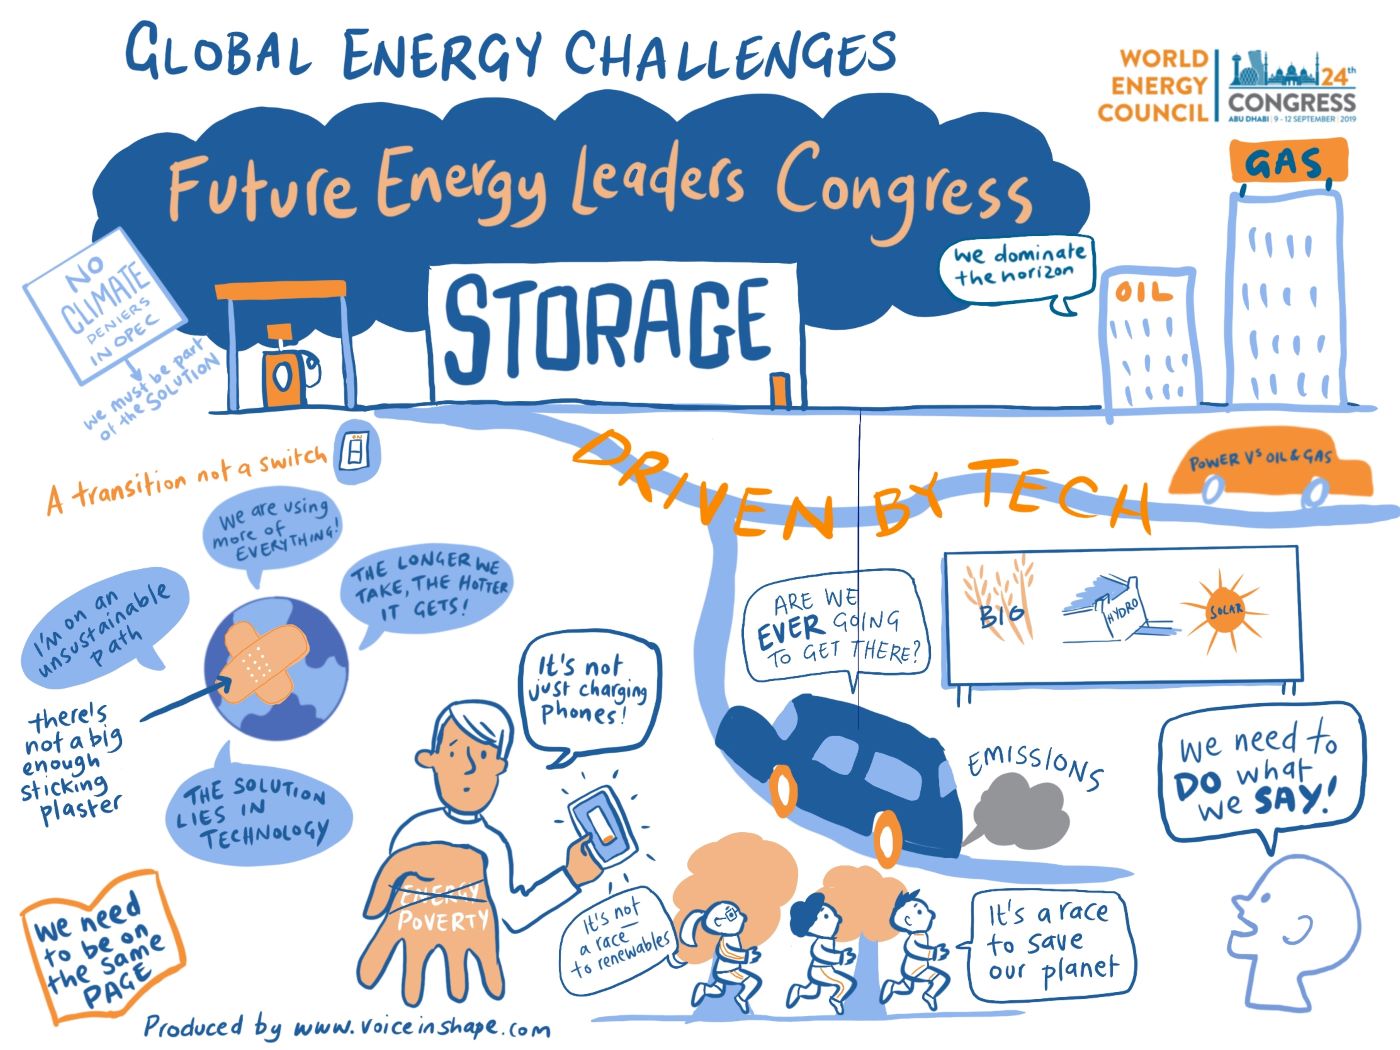 The CNN Global Energy Challenge - Future energy council leaders